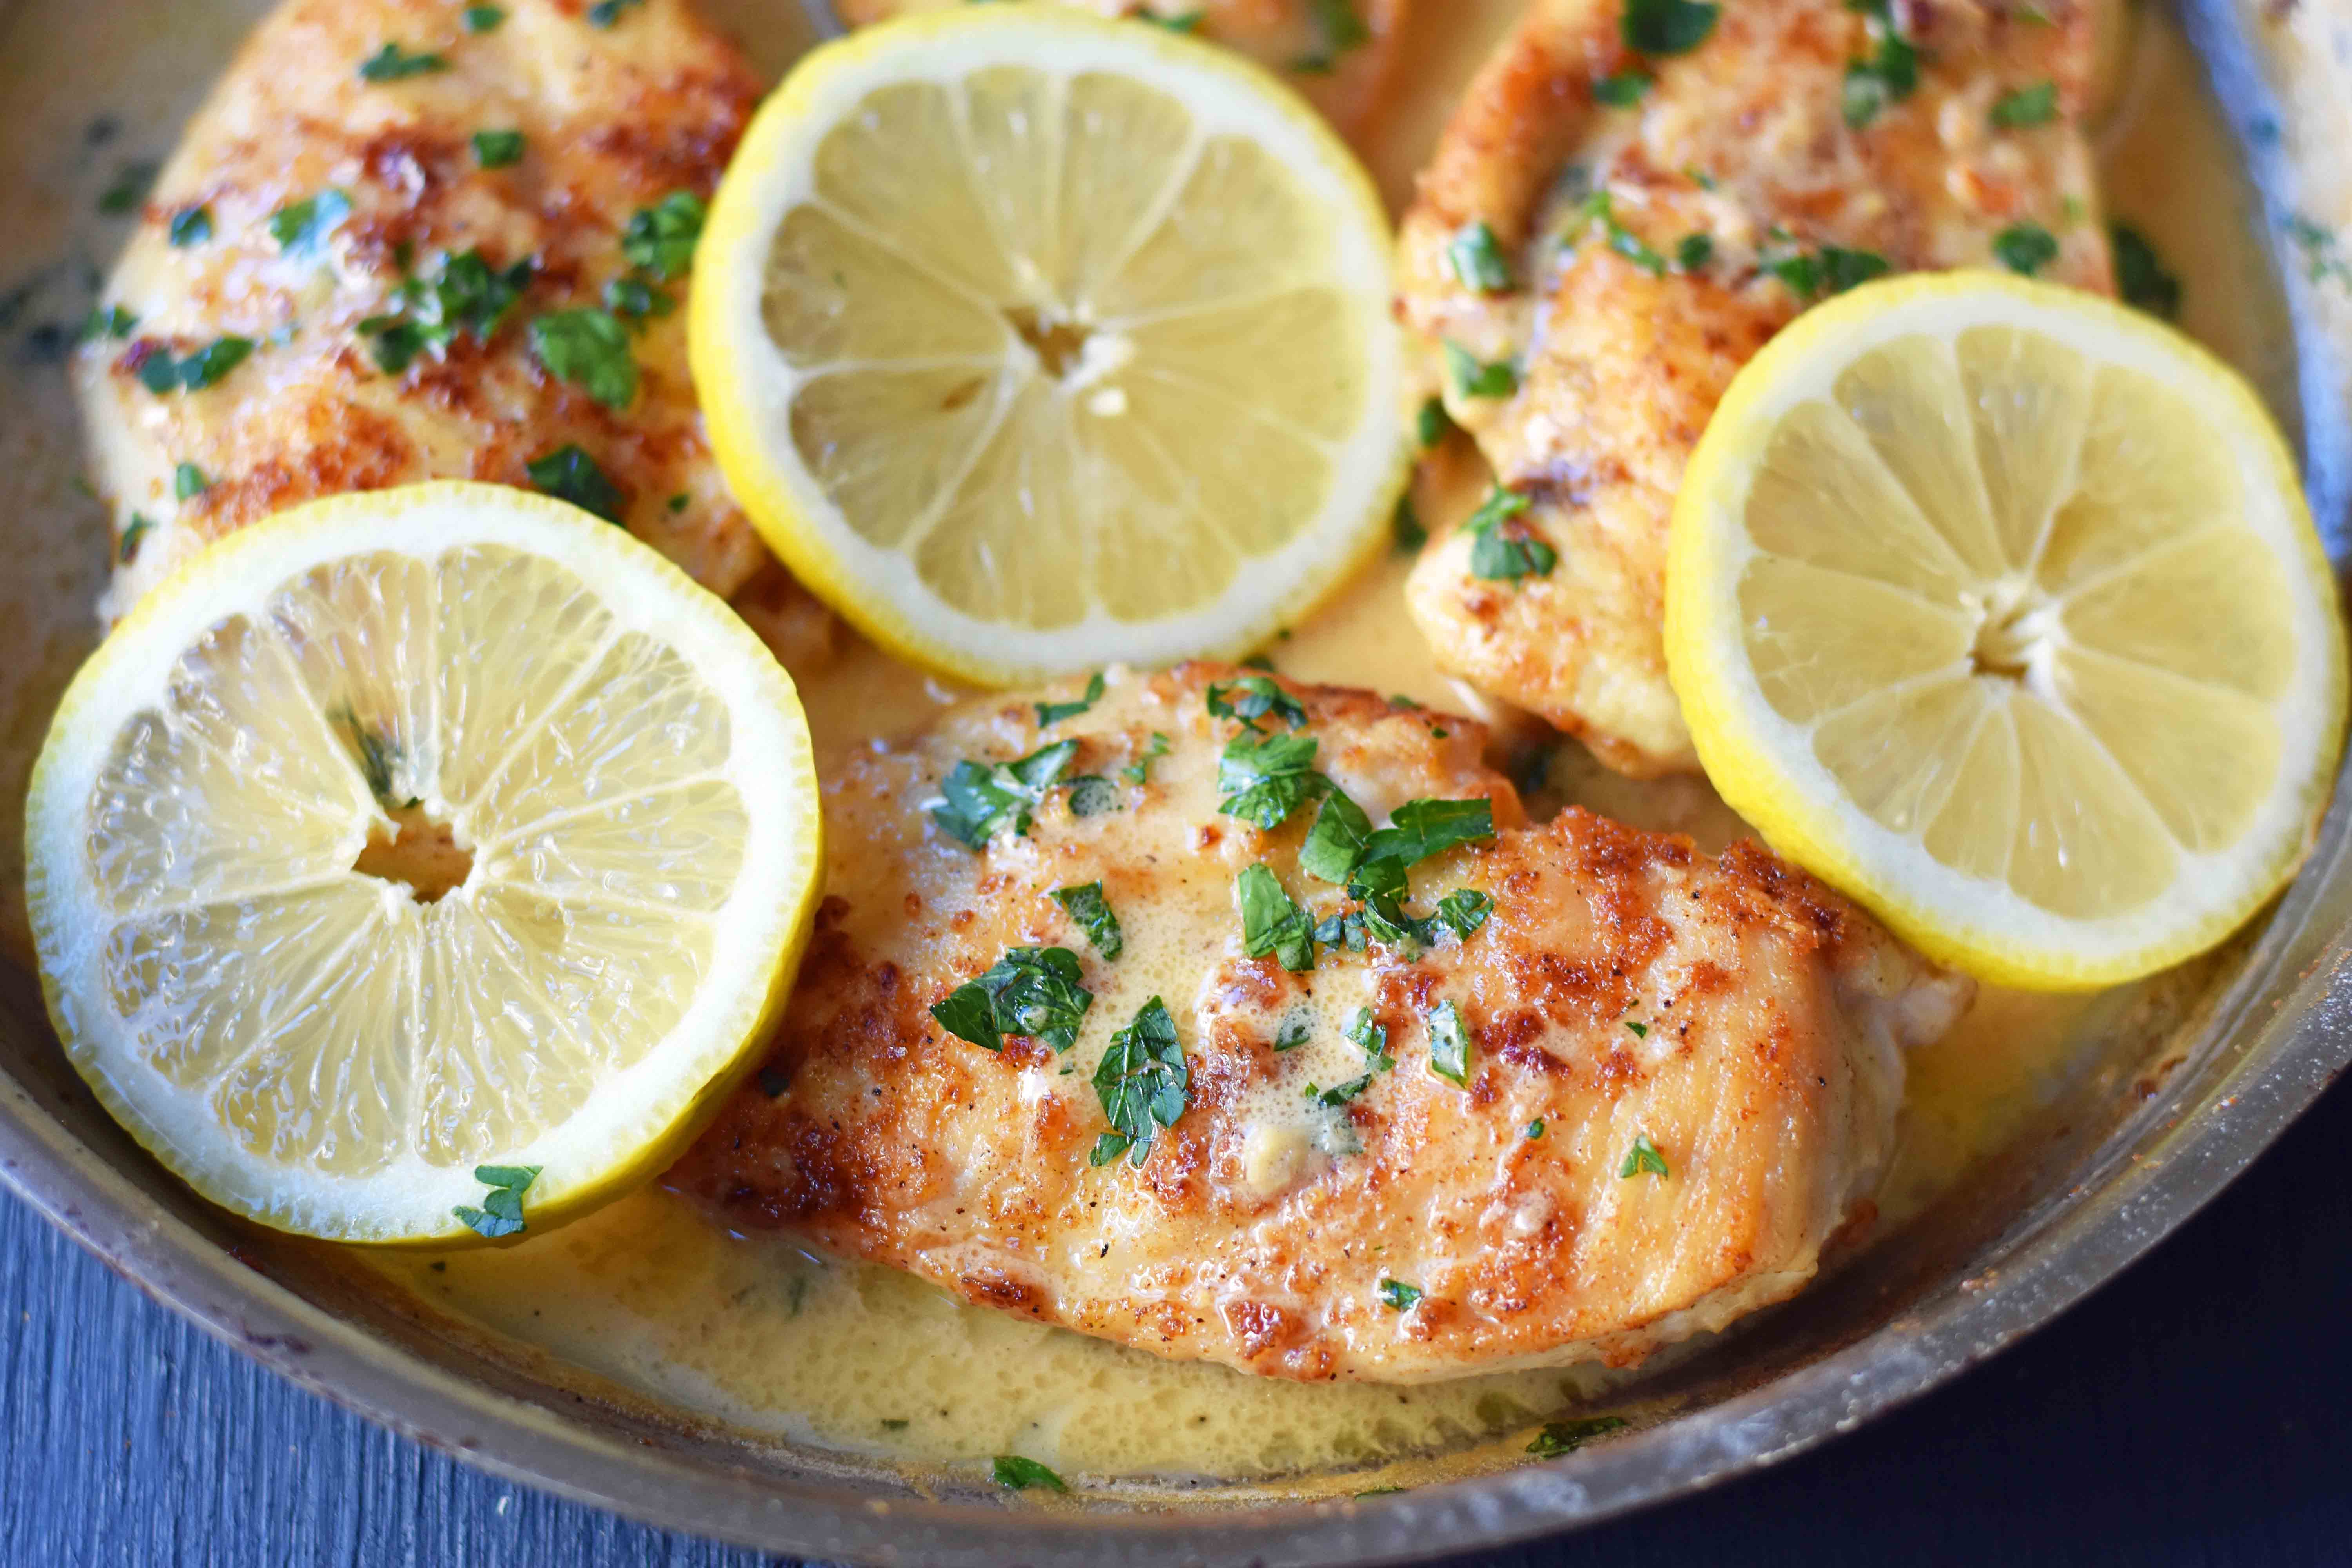 This simple 20-minute Skillet Lemon Butter Chicken is a pan-fried chicken in a silky lemon butter sauce. Chicken sauteed in butter and olive oil and topped with a creamy lemon butter sauce. An easy weeknight dinner that your whole family will love! www.modernhoney.com